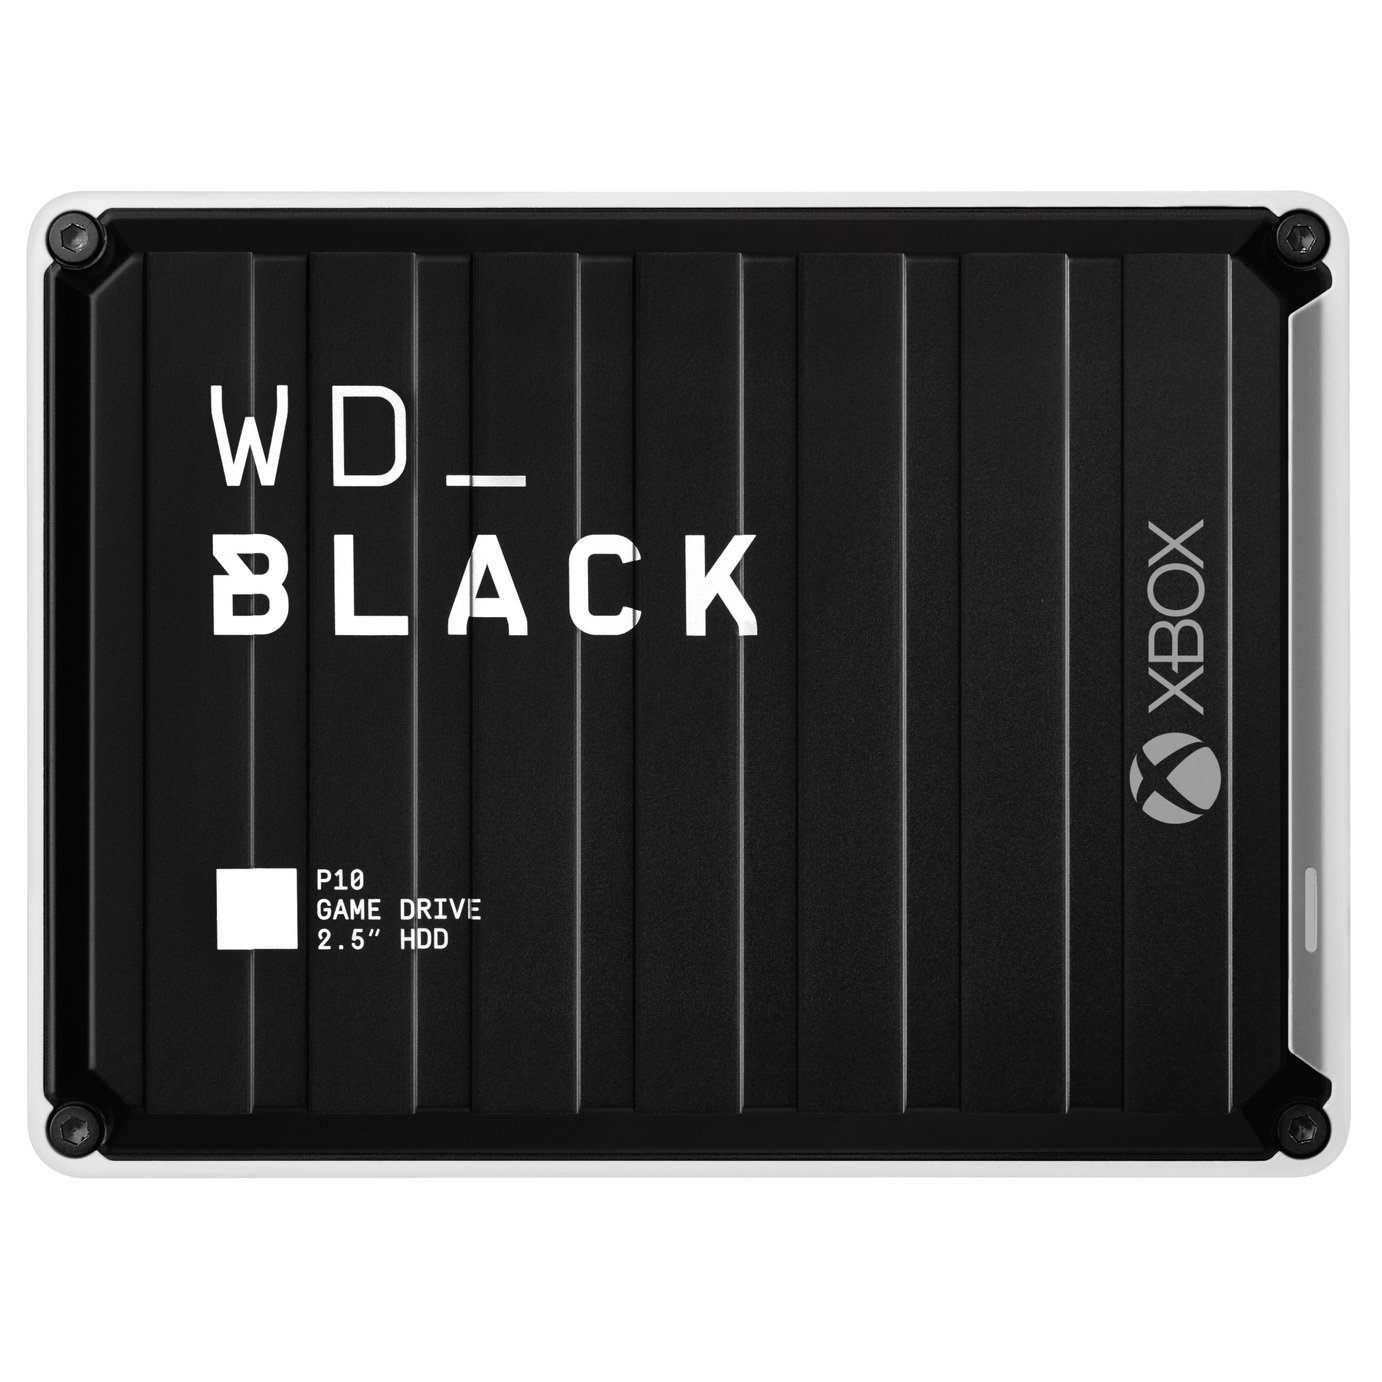 WD Black 5TB P10 Gaming Drive for Xbox One Review